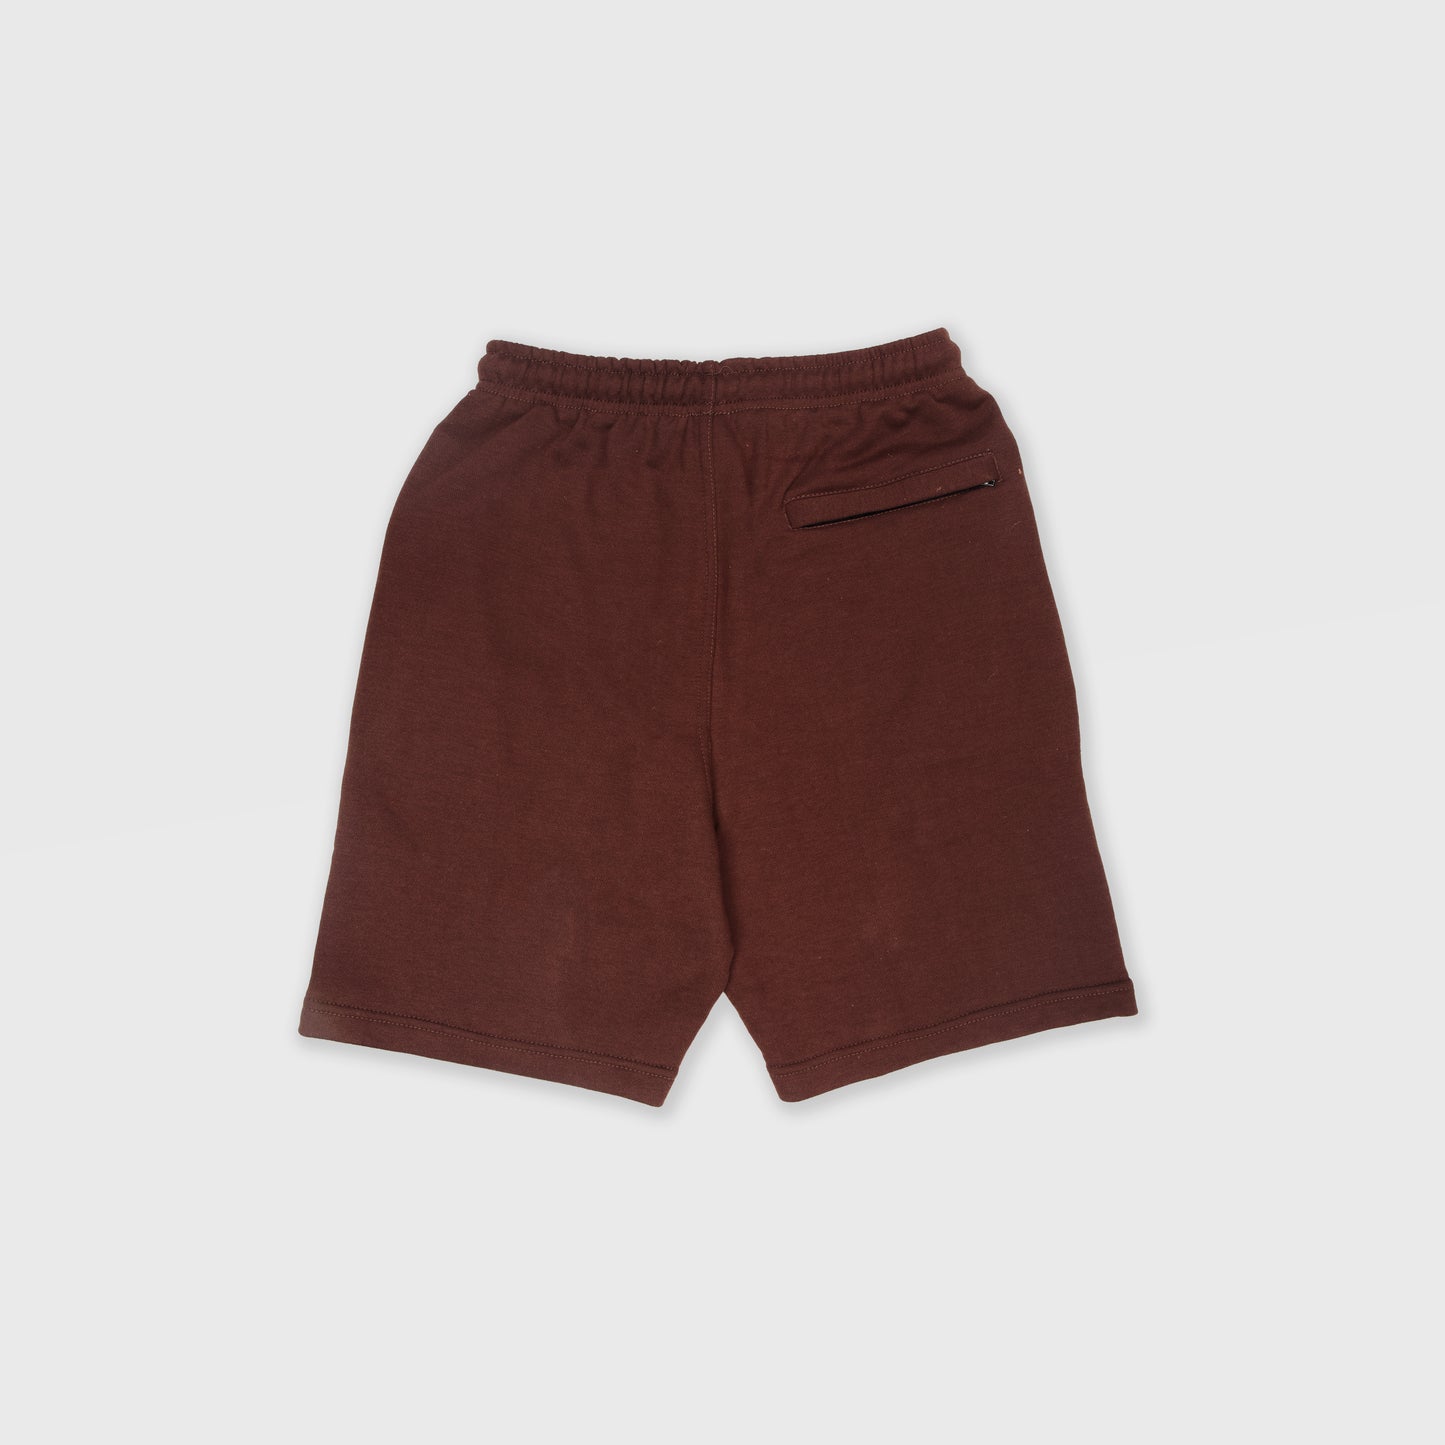 CHOCOLATE SOLID SWEAT SHORTS WITH WHITETERK EMBROIDERED LOGO